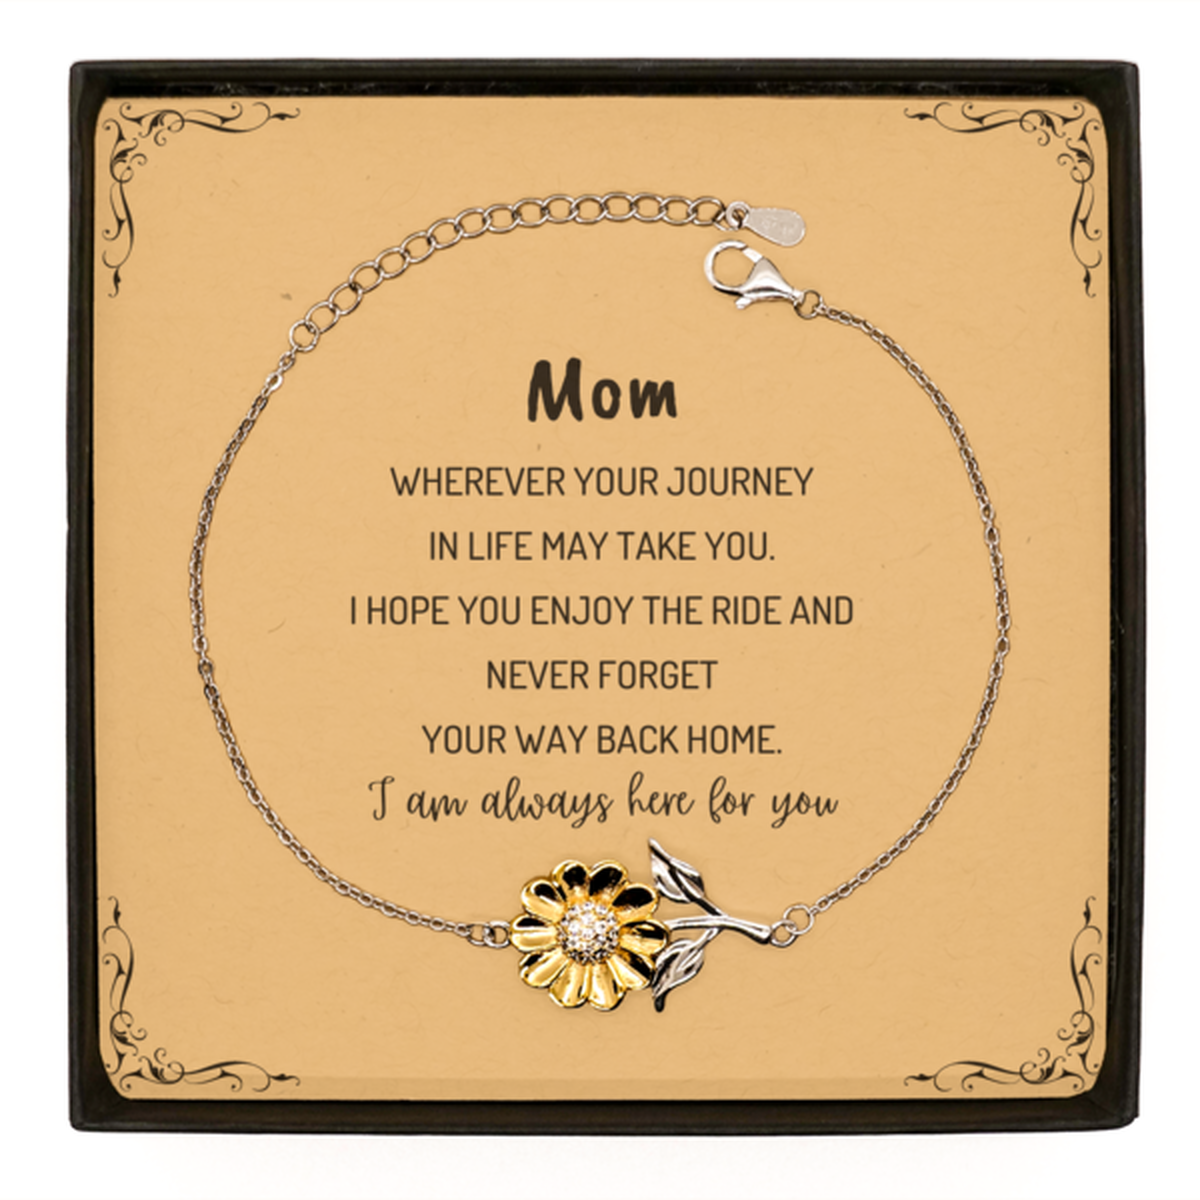 Mom wherever your journey in life may take you, I am always here for you Mom Sunflower Bracelet, Awesome Christmas Gifts For Mom Message Card, Mom Birthday Gifts for Men Women Family Loved One